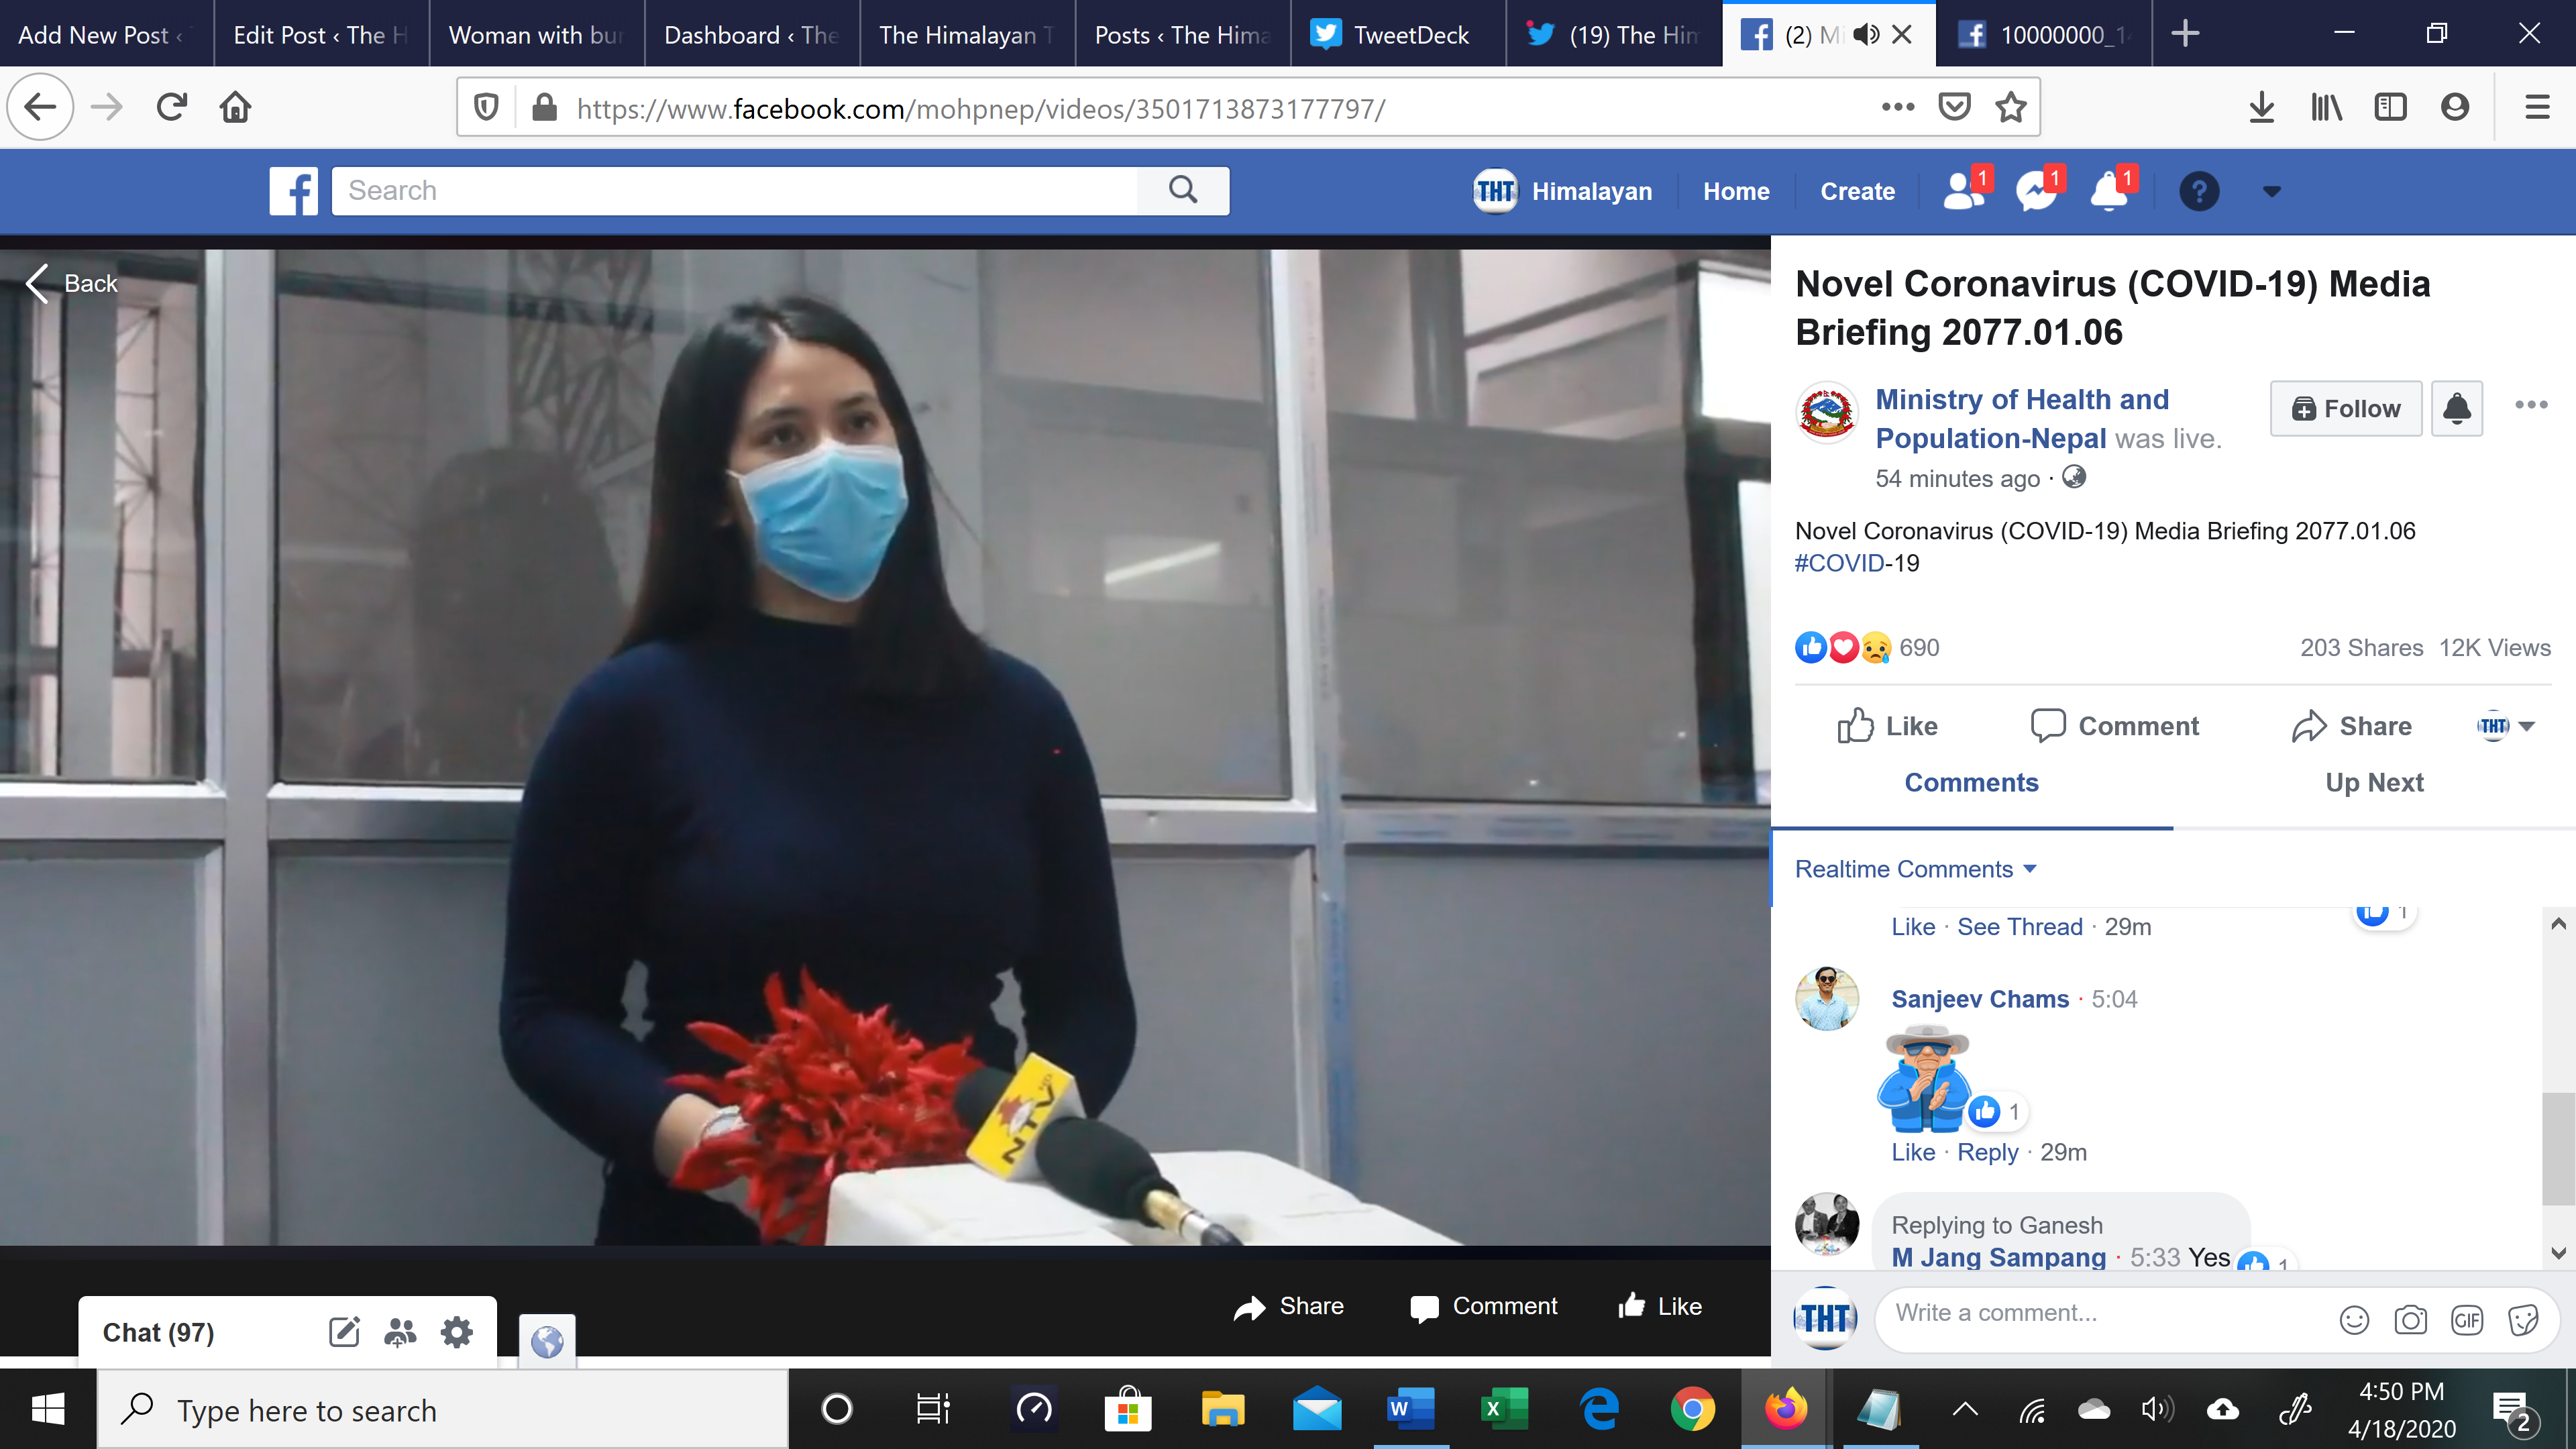 A screenshot of the second person who has recovered from COVID-19 and was discharged from Teku-based Sukraraj Tropical and Infectious Disease Hospital, in Kathmandu, on Saturday, April 18, 2020. Image: Ministry of Health and Population